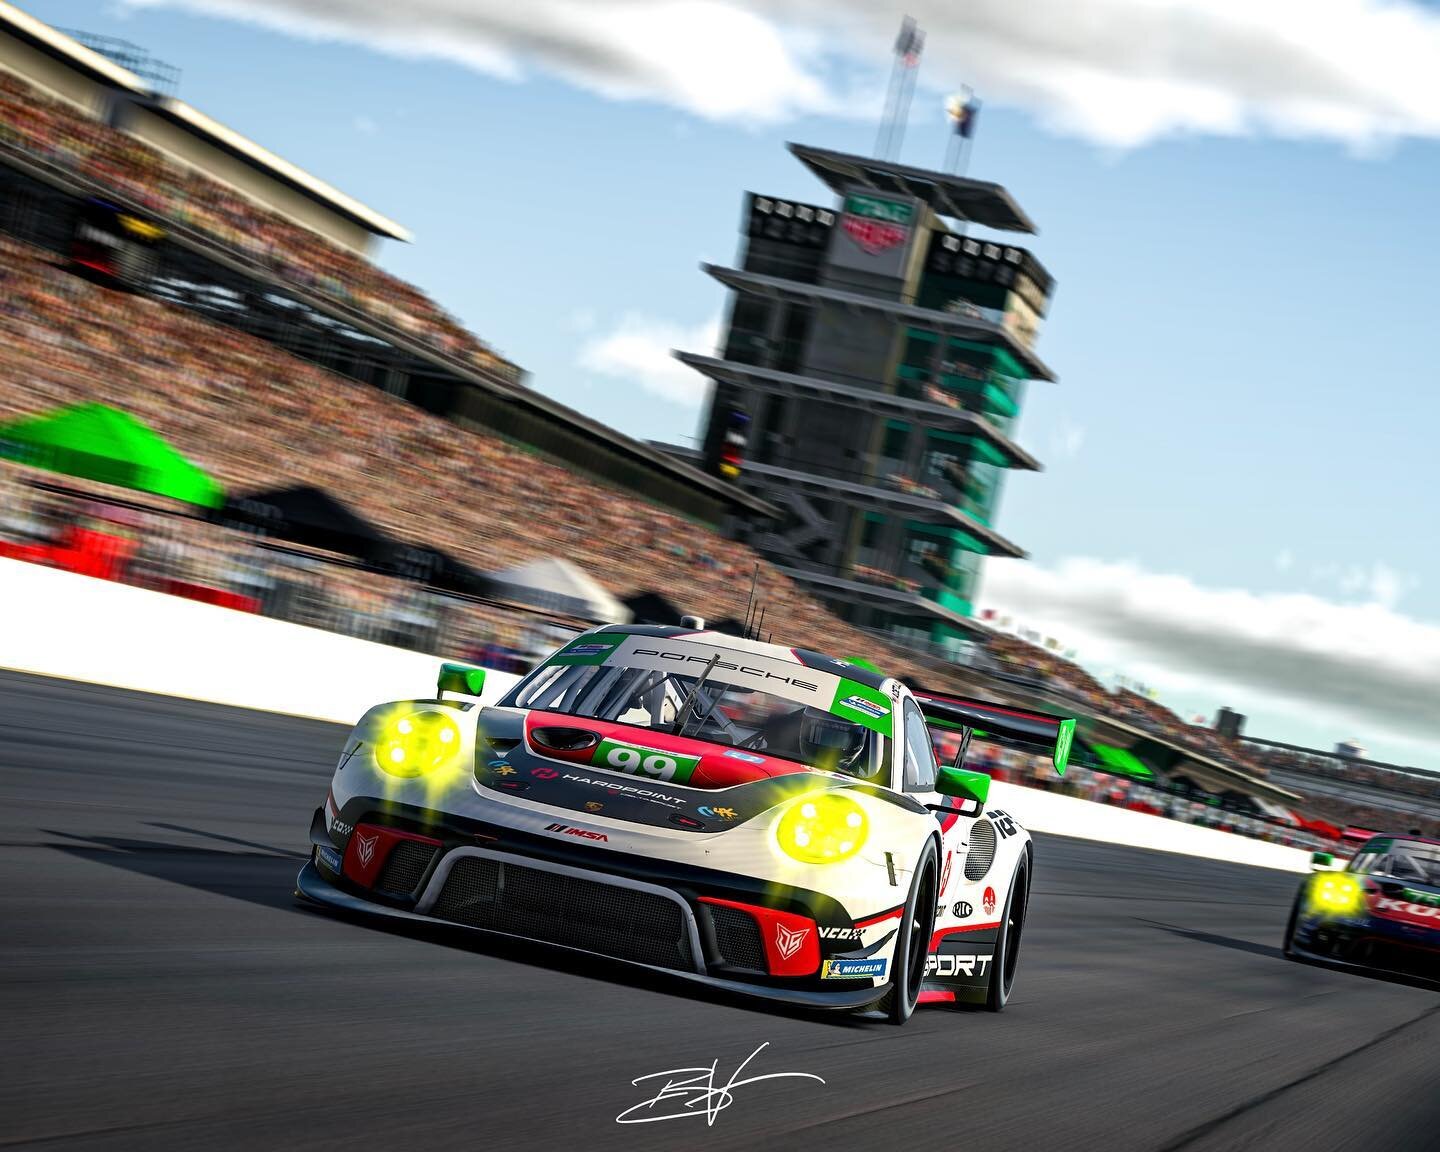 Round 3✔️

The #99 Hardpoint By DeltaSport Porsche qualified P10 and went as far as leading its first lap of the season around the legendary Indianapolis Motor Speedway. After a solid run, our drivers @hbx_chr and @sdcampbell brought our team home P1